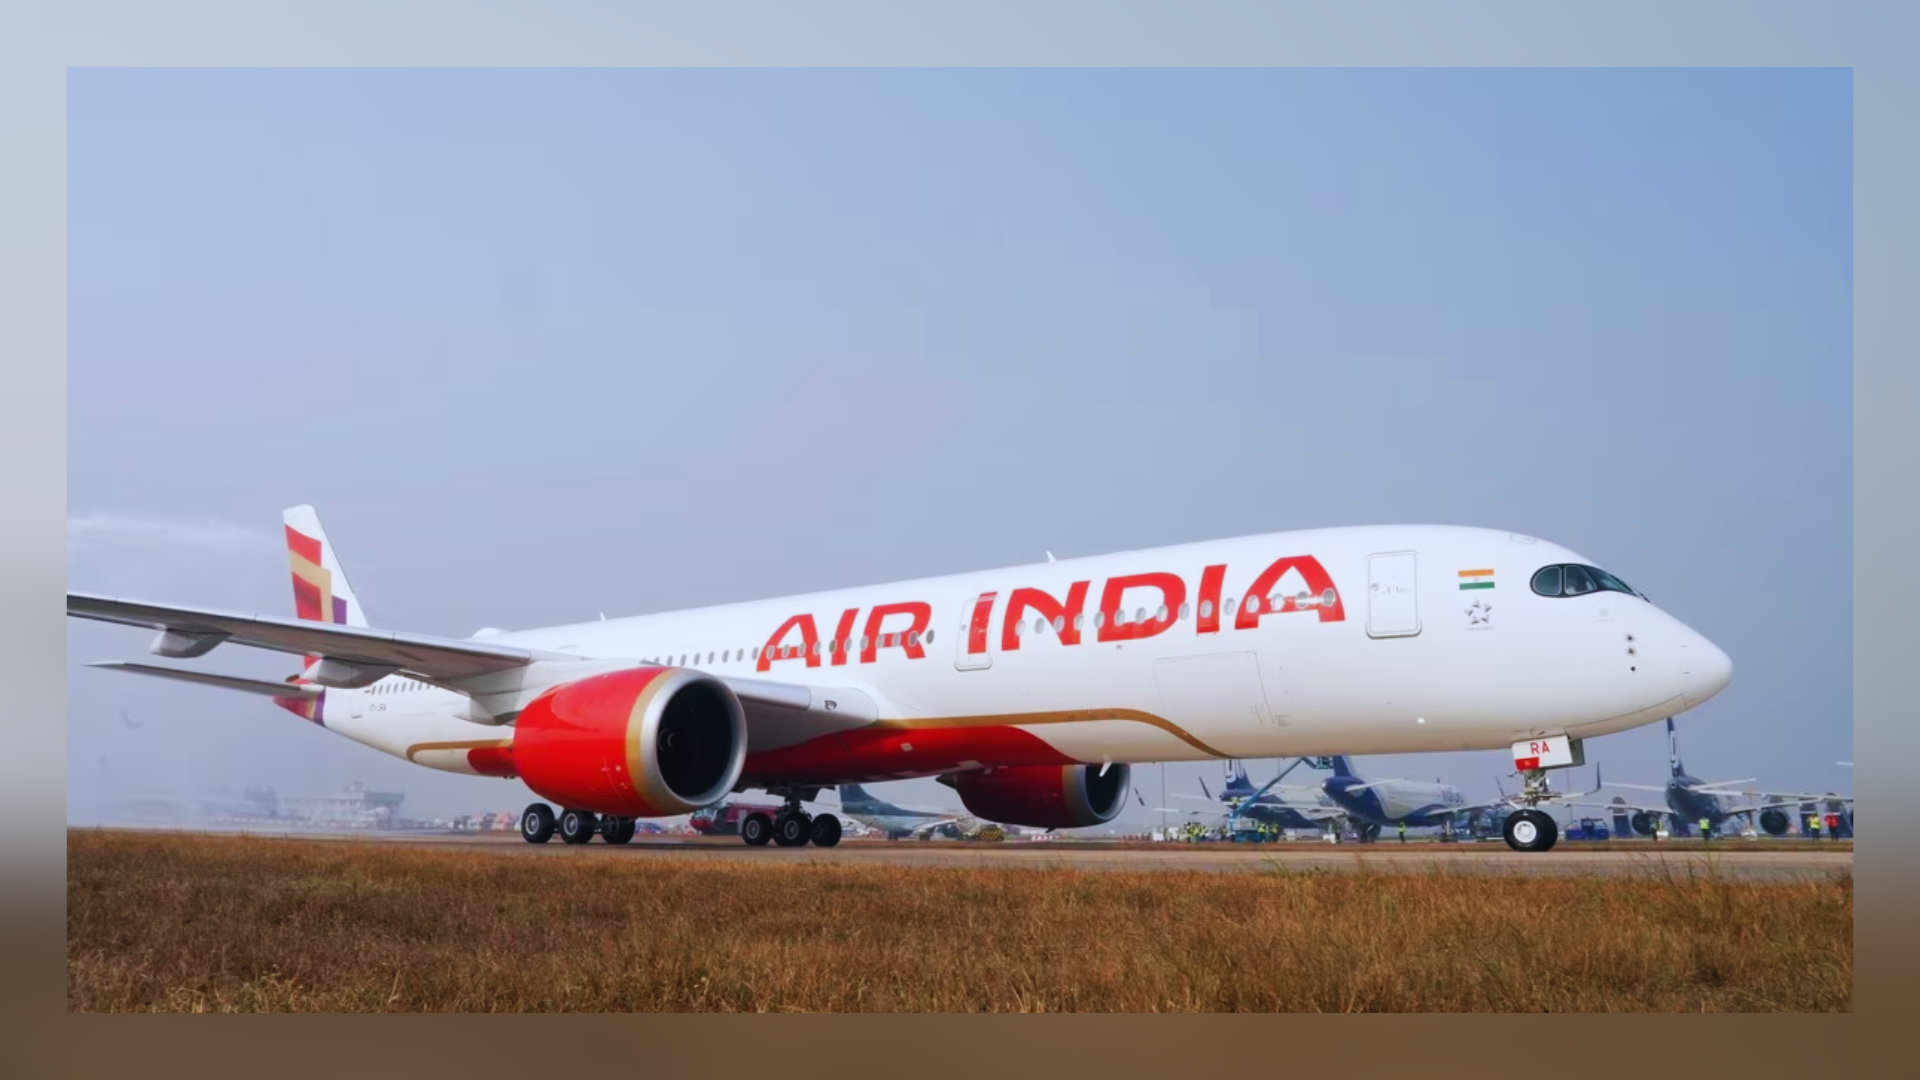 Air India Express Crew Return To Duty After Mass Sick Leave, Normalcy Expected Soon